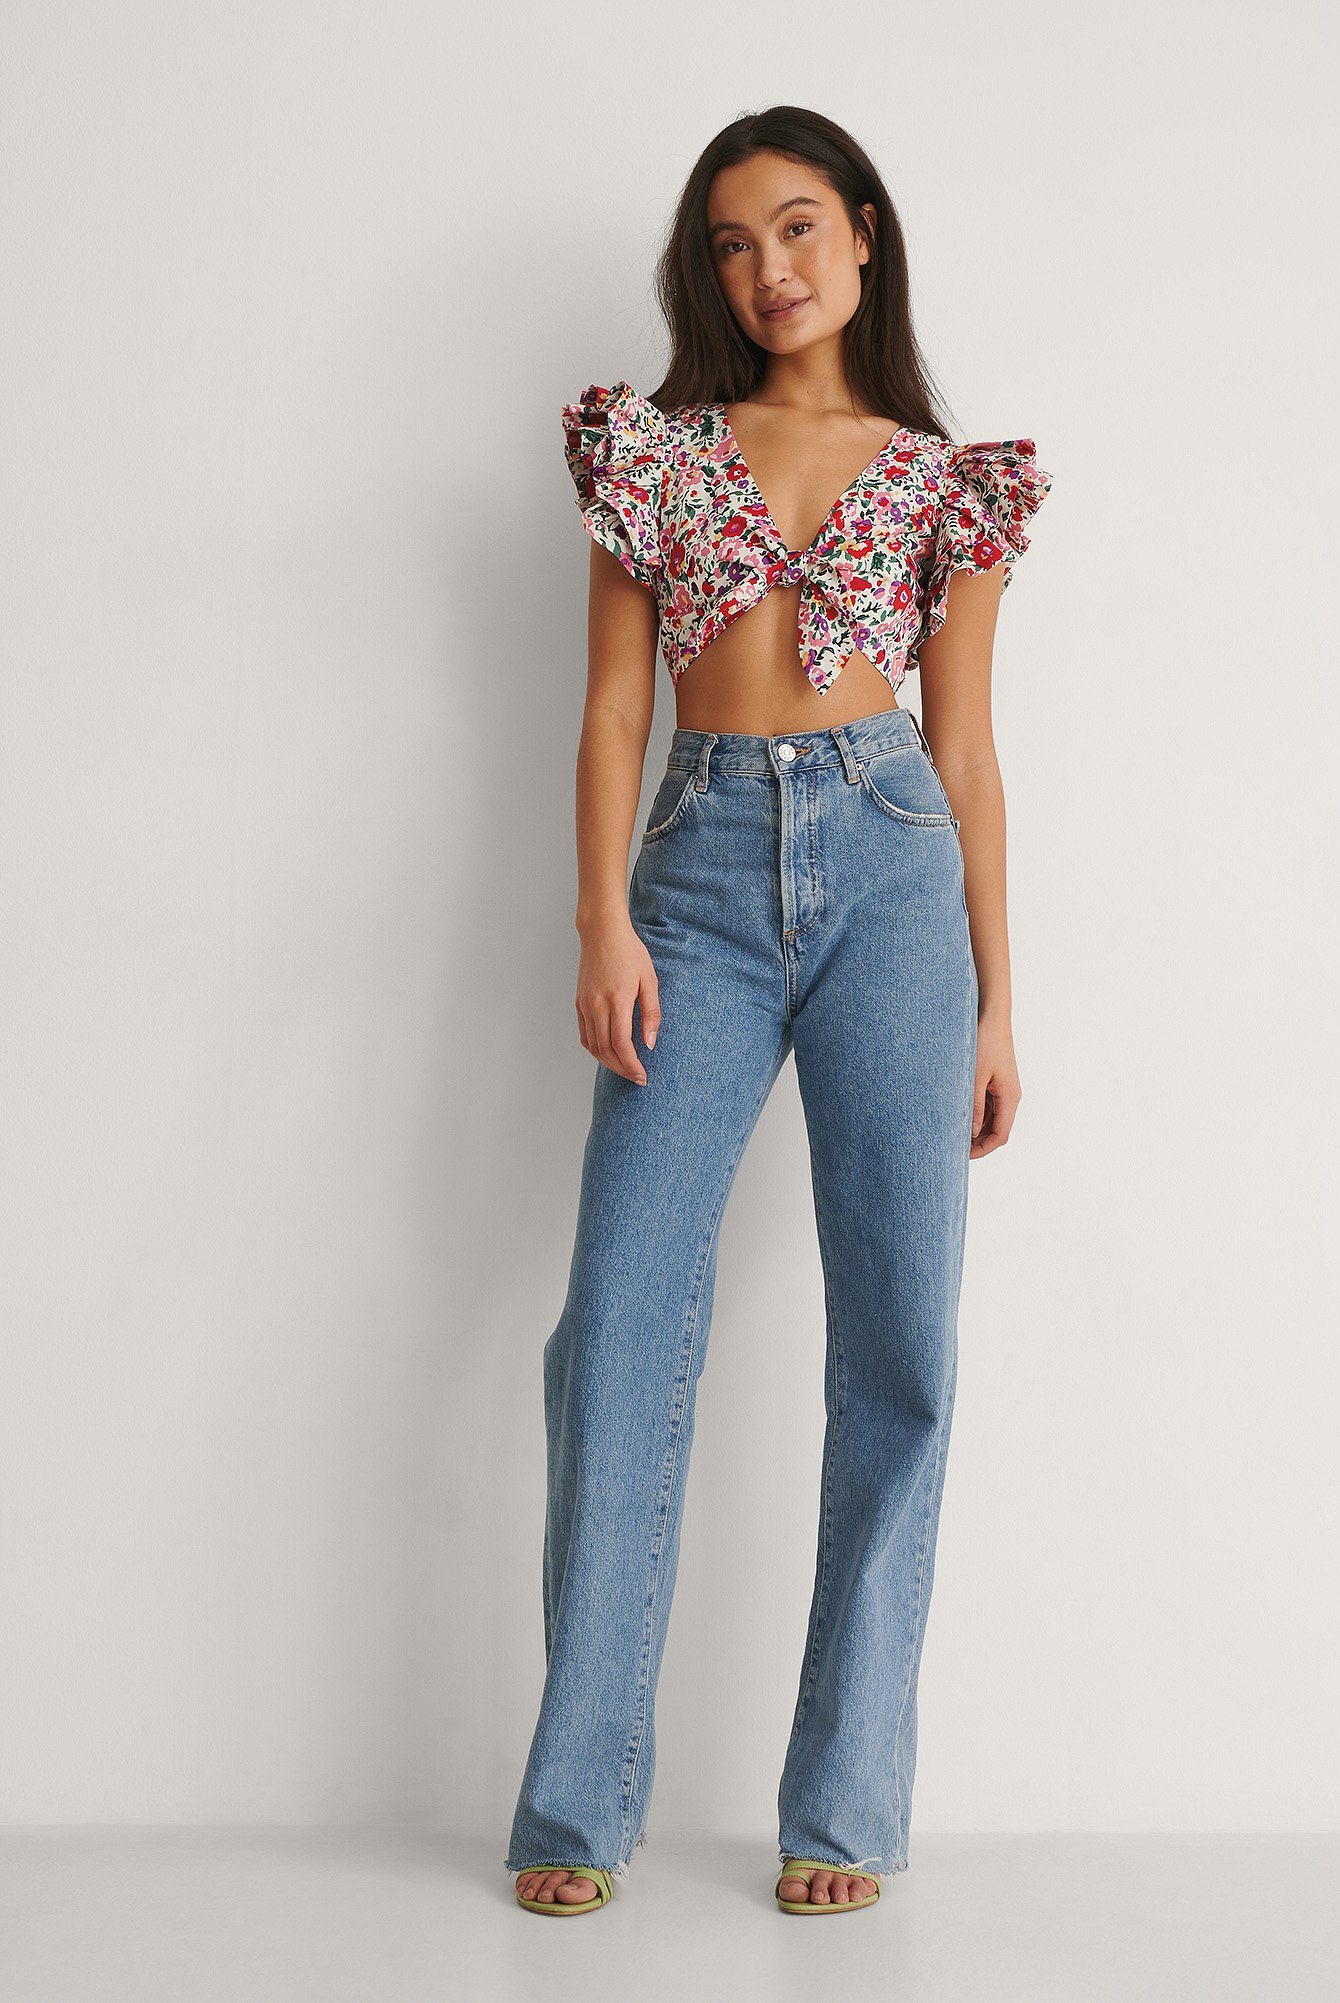 Multi Floral Print Frill Knot Top